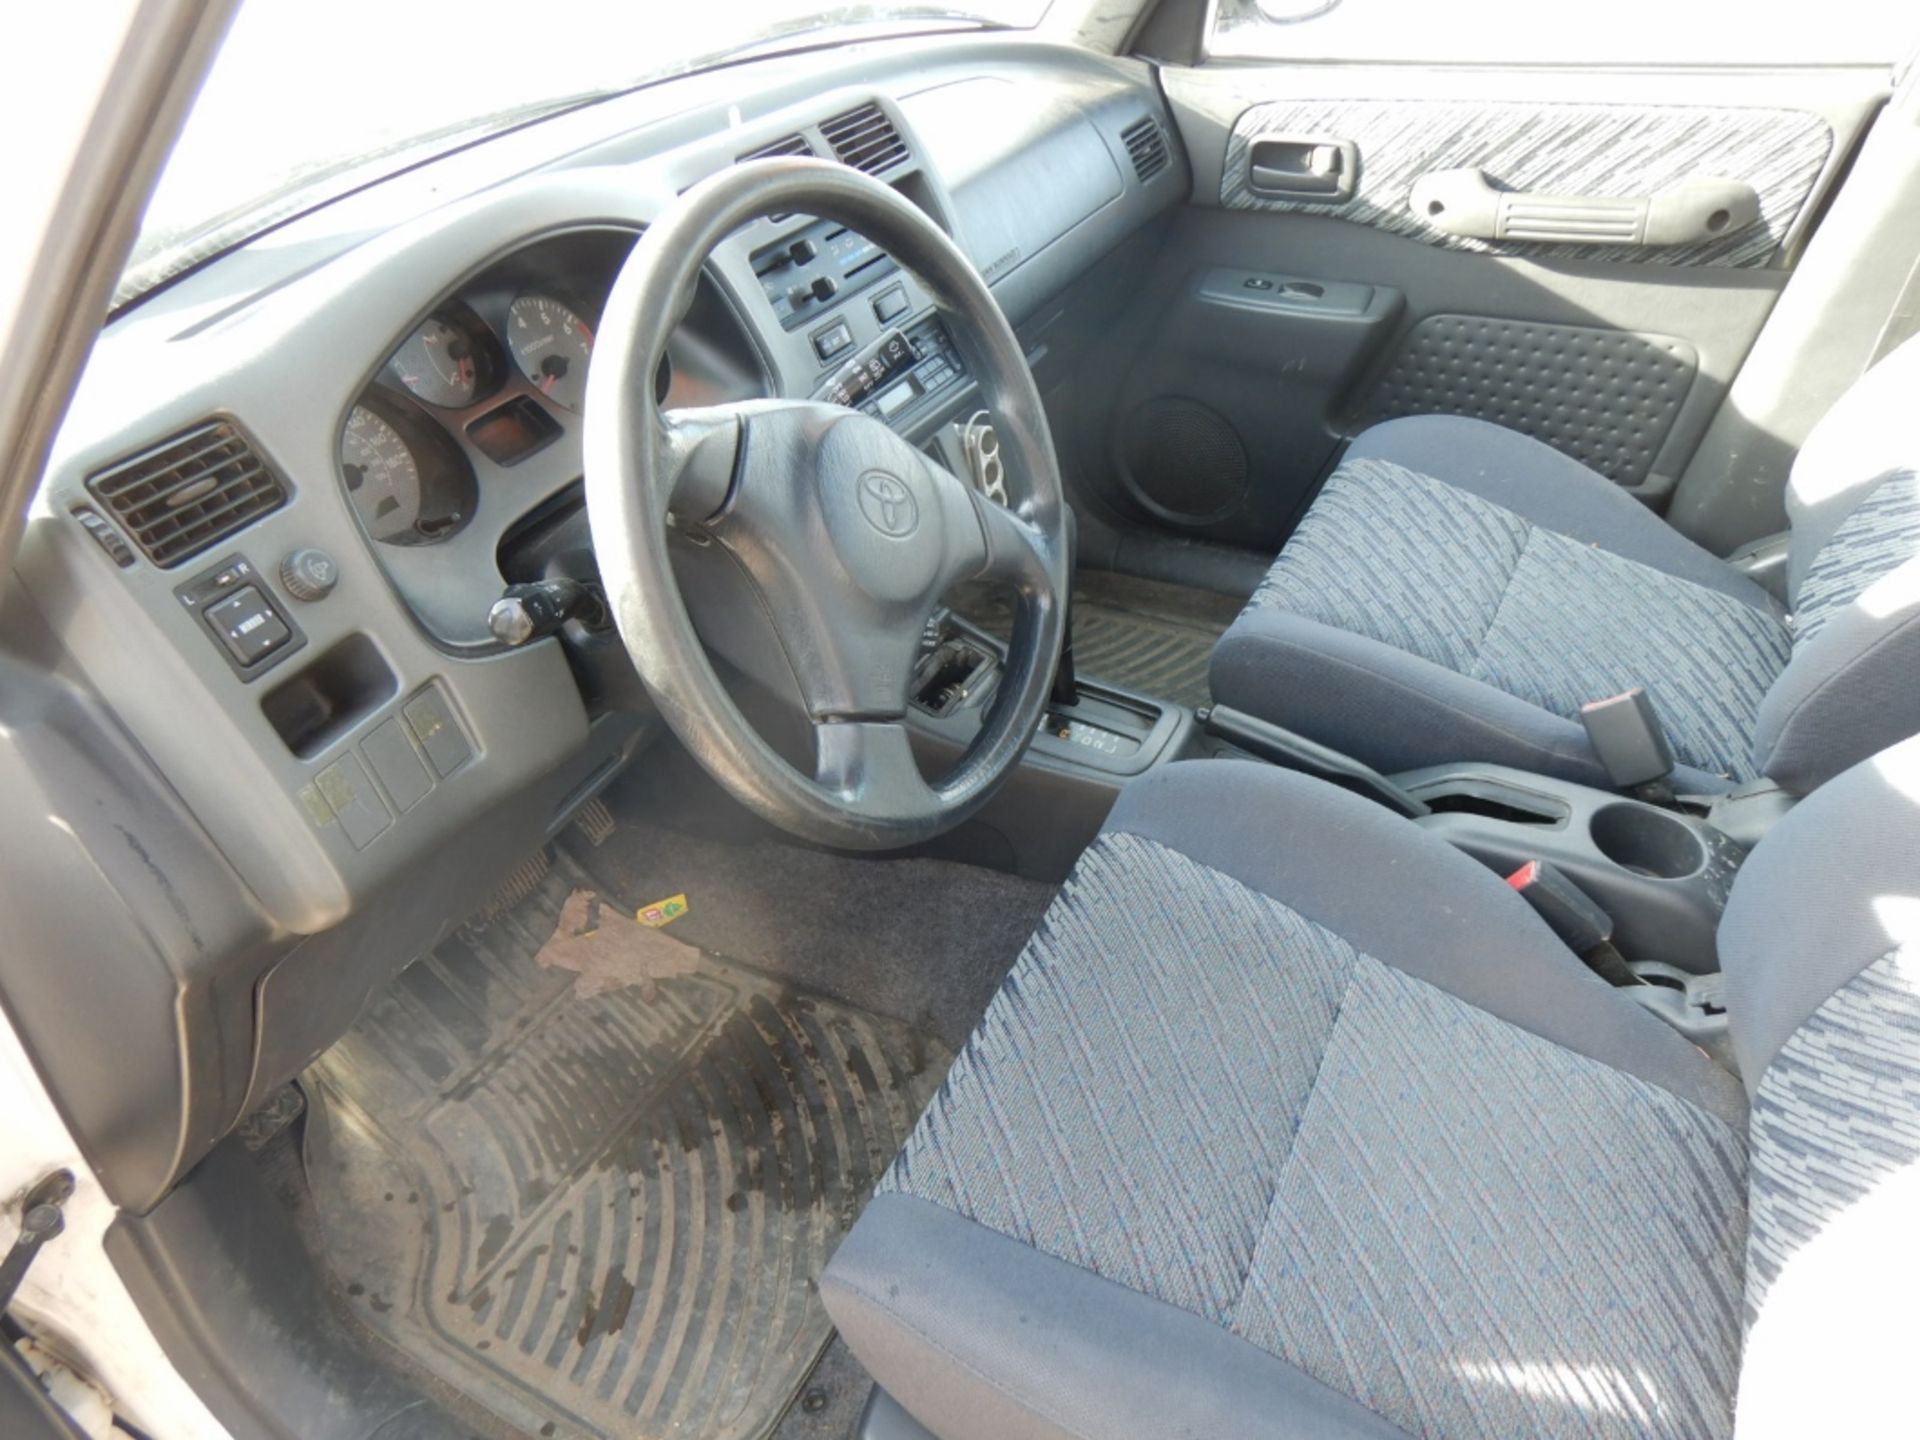 1998 TOYOTA RAV4, AT, SUV, 4DR, CLOTH, 229,588 KM SHOWING, S/N JT3HP10V2W7085878 - Image 5 of 7